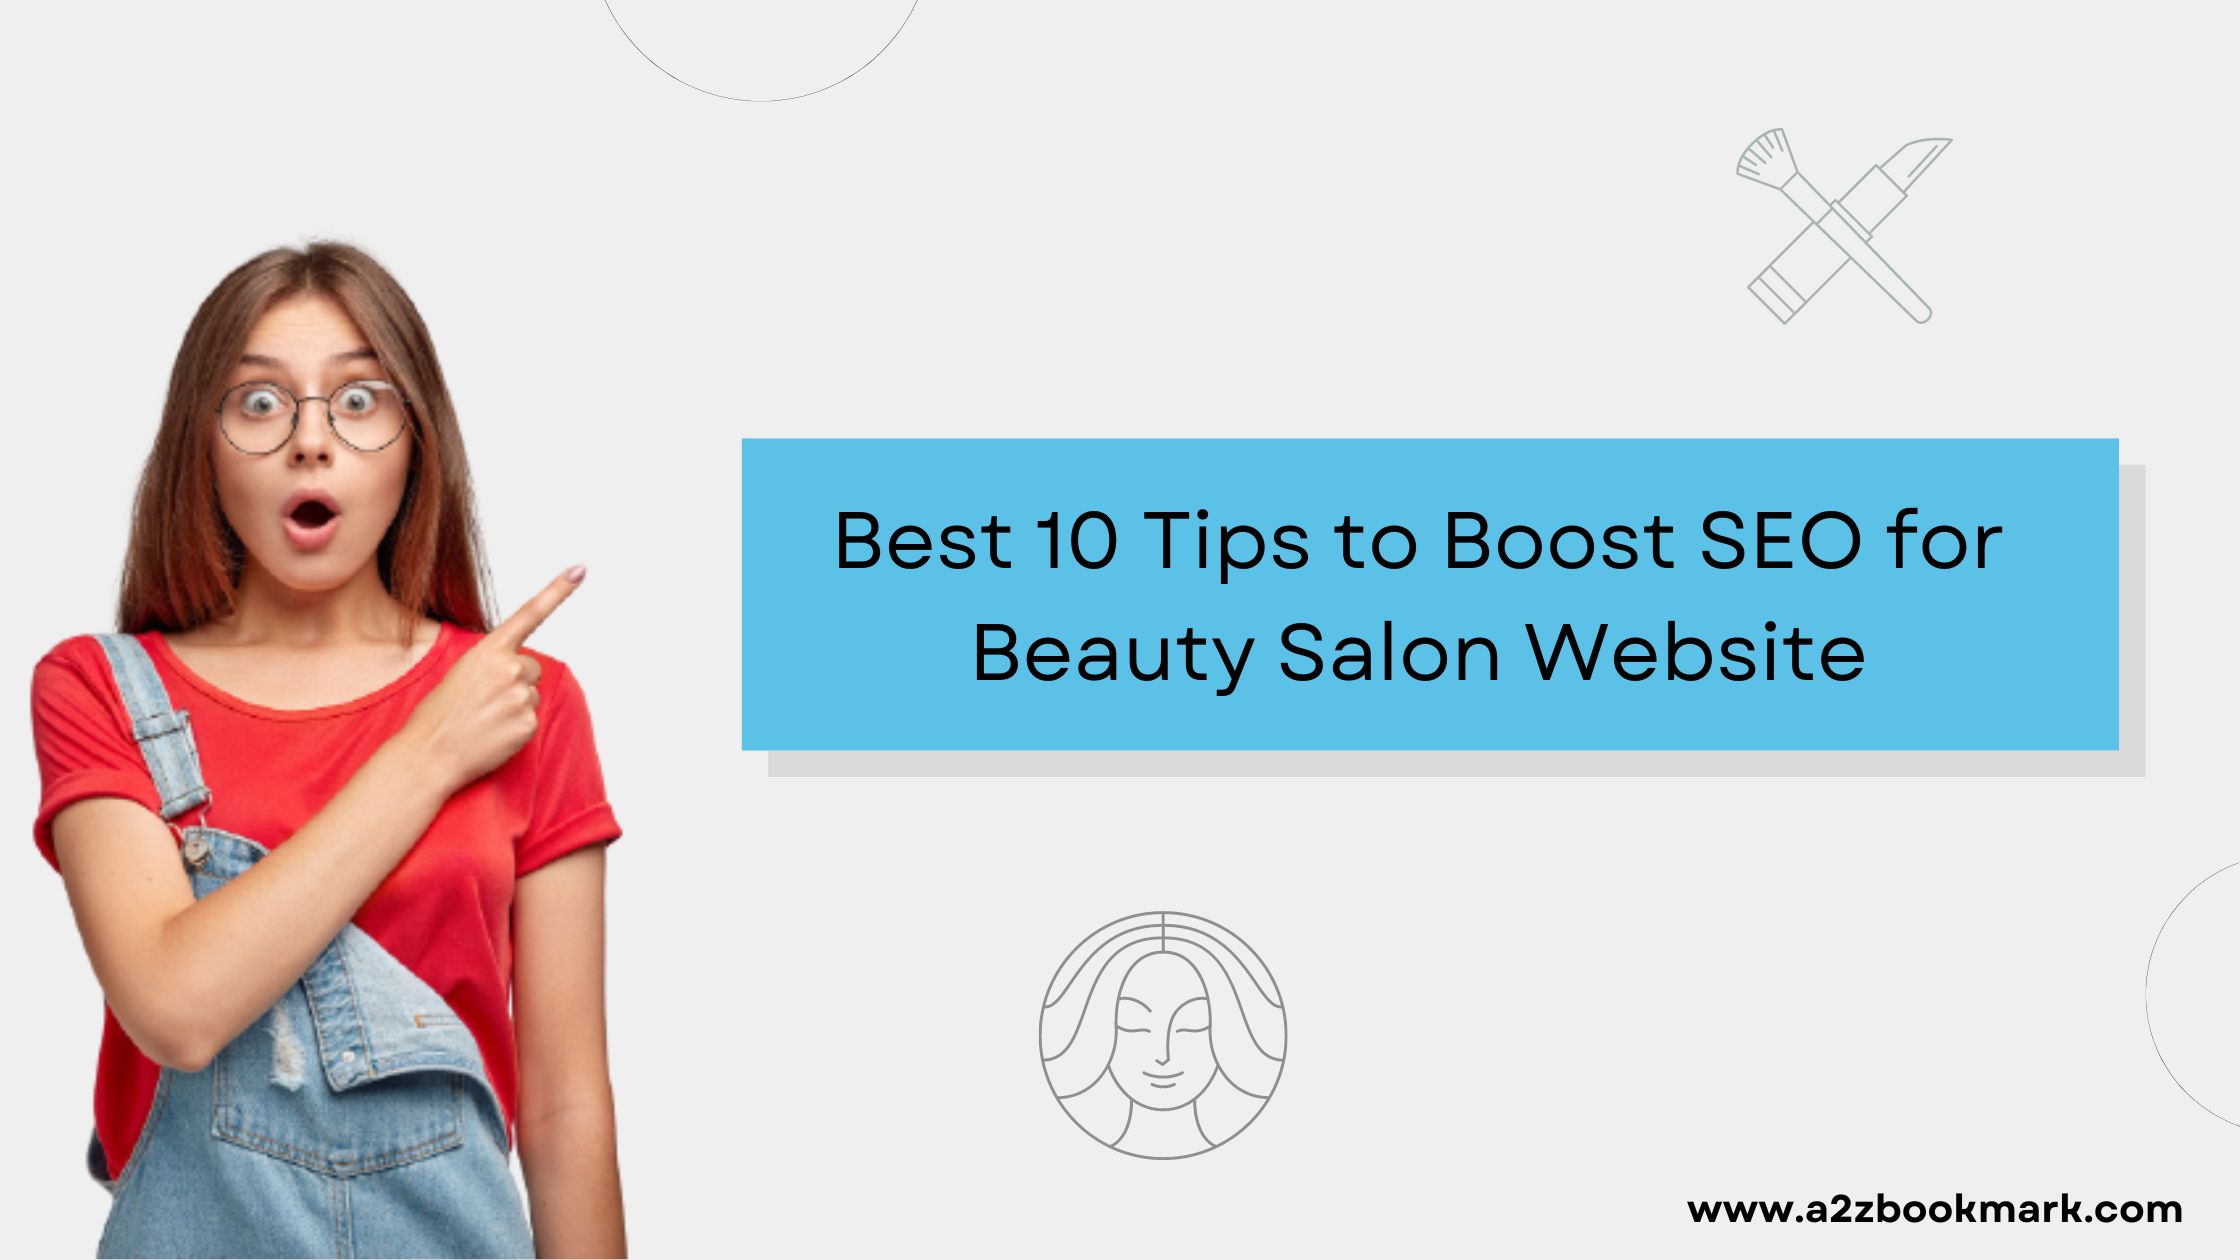 Best 10 Tips to Boost SEO for Beauty Salon Website